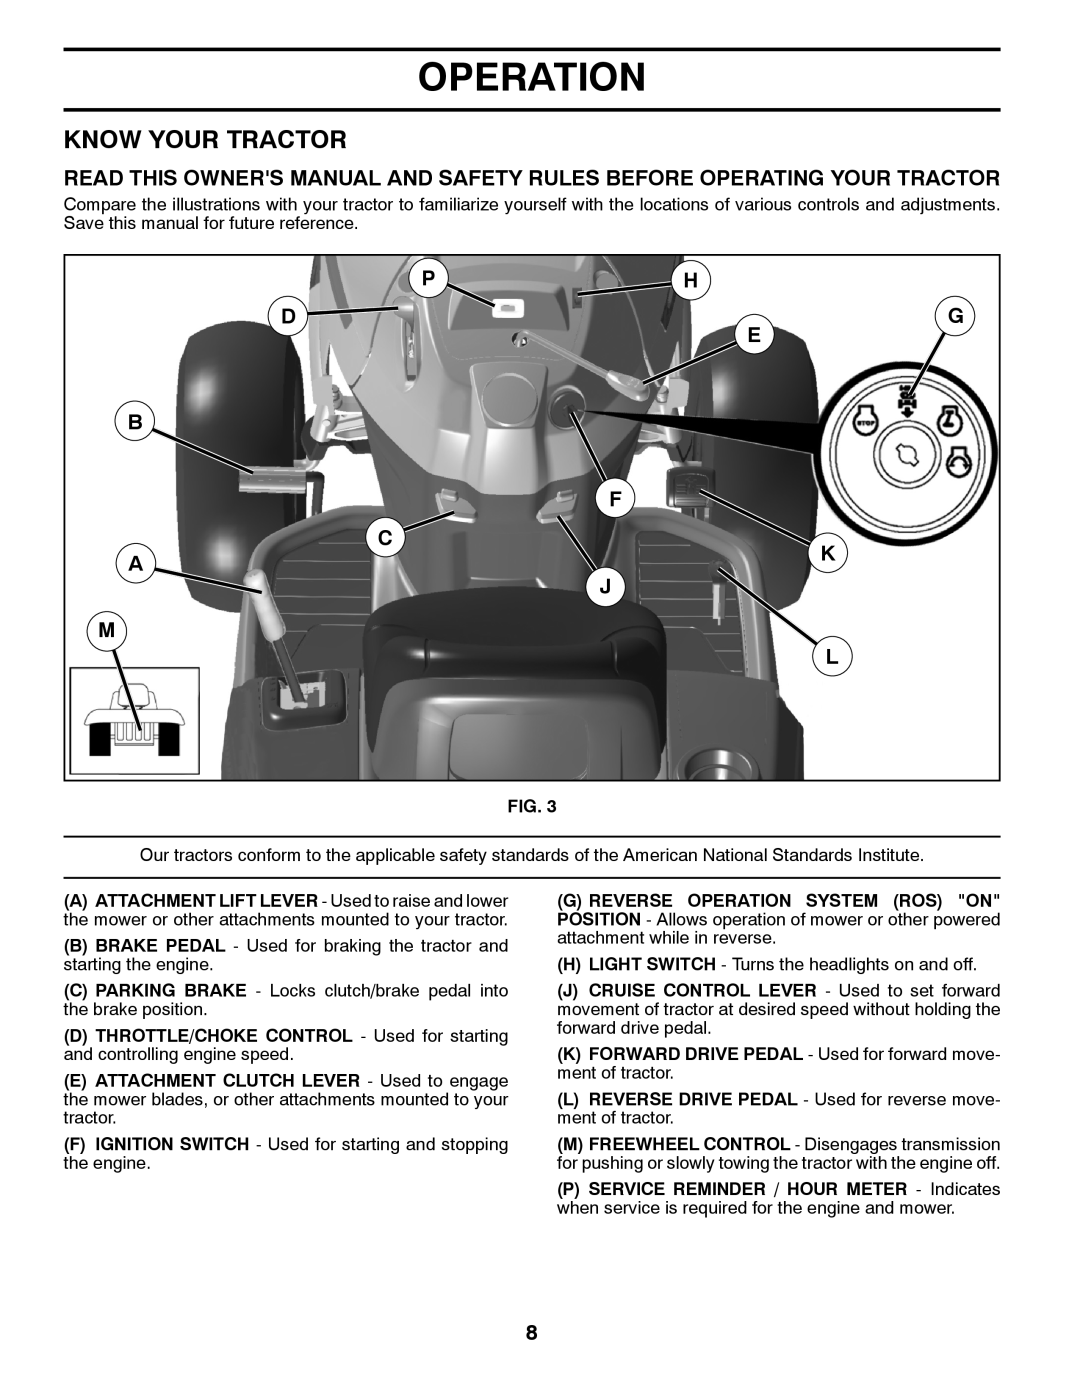 Husqvarna 96045000409, 532 42 32-01 owner manual Know Your Tractor, Ph Dg E, Operation 